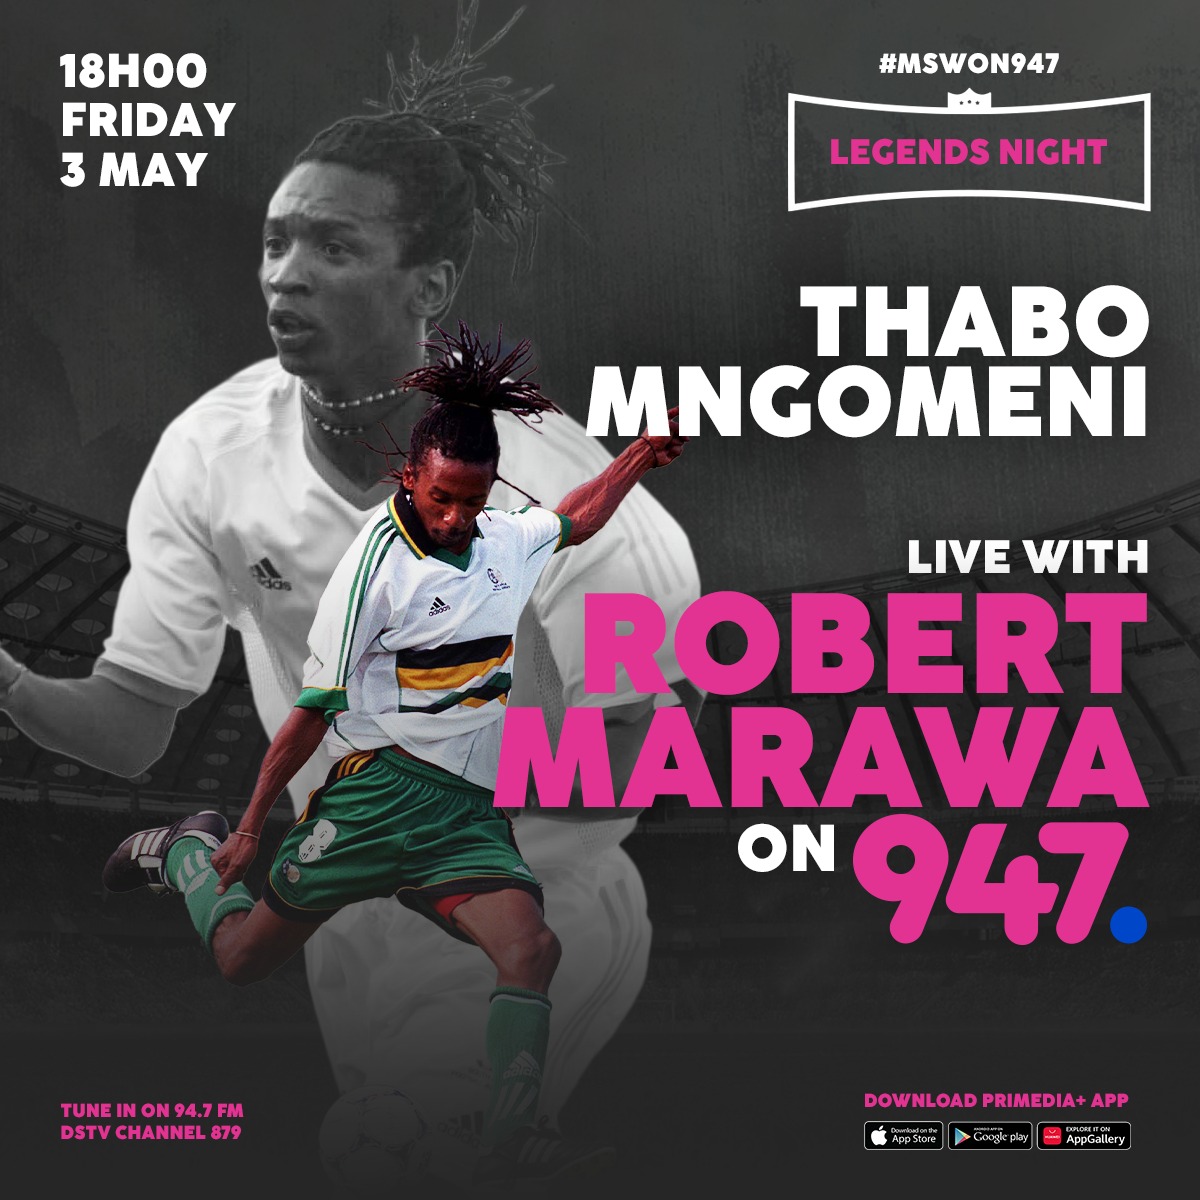 Jah Man!!! That's all I'm saying!! Catch the rest LIVE TONIGHT ON #MSWO947 What memories does he reignite in you?? #LegendsNight 📲 060 708 0484 📽 @947 @VumaFM @RISEfm943 @SowetanLIVE